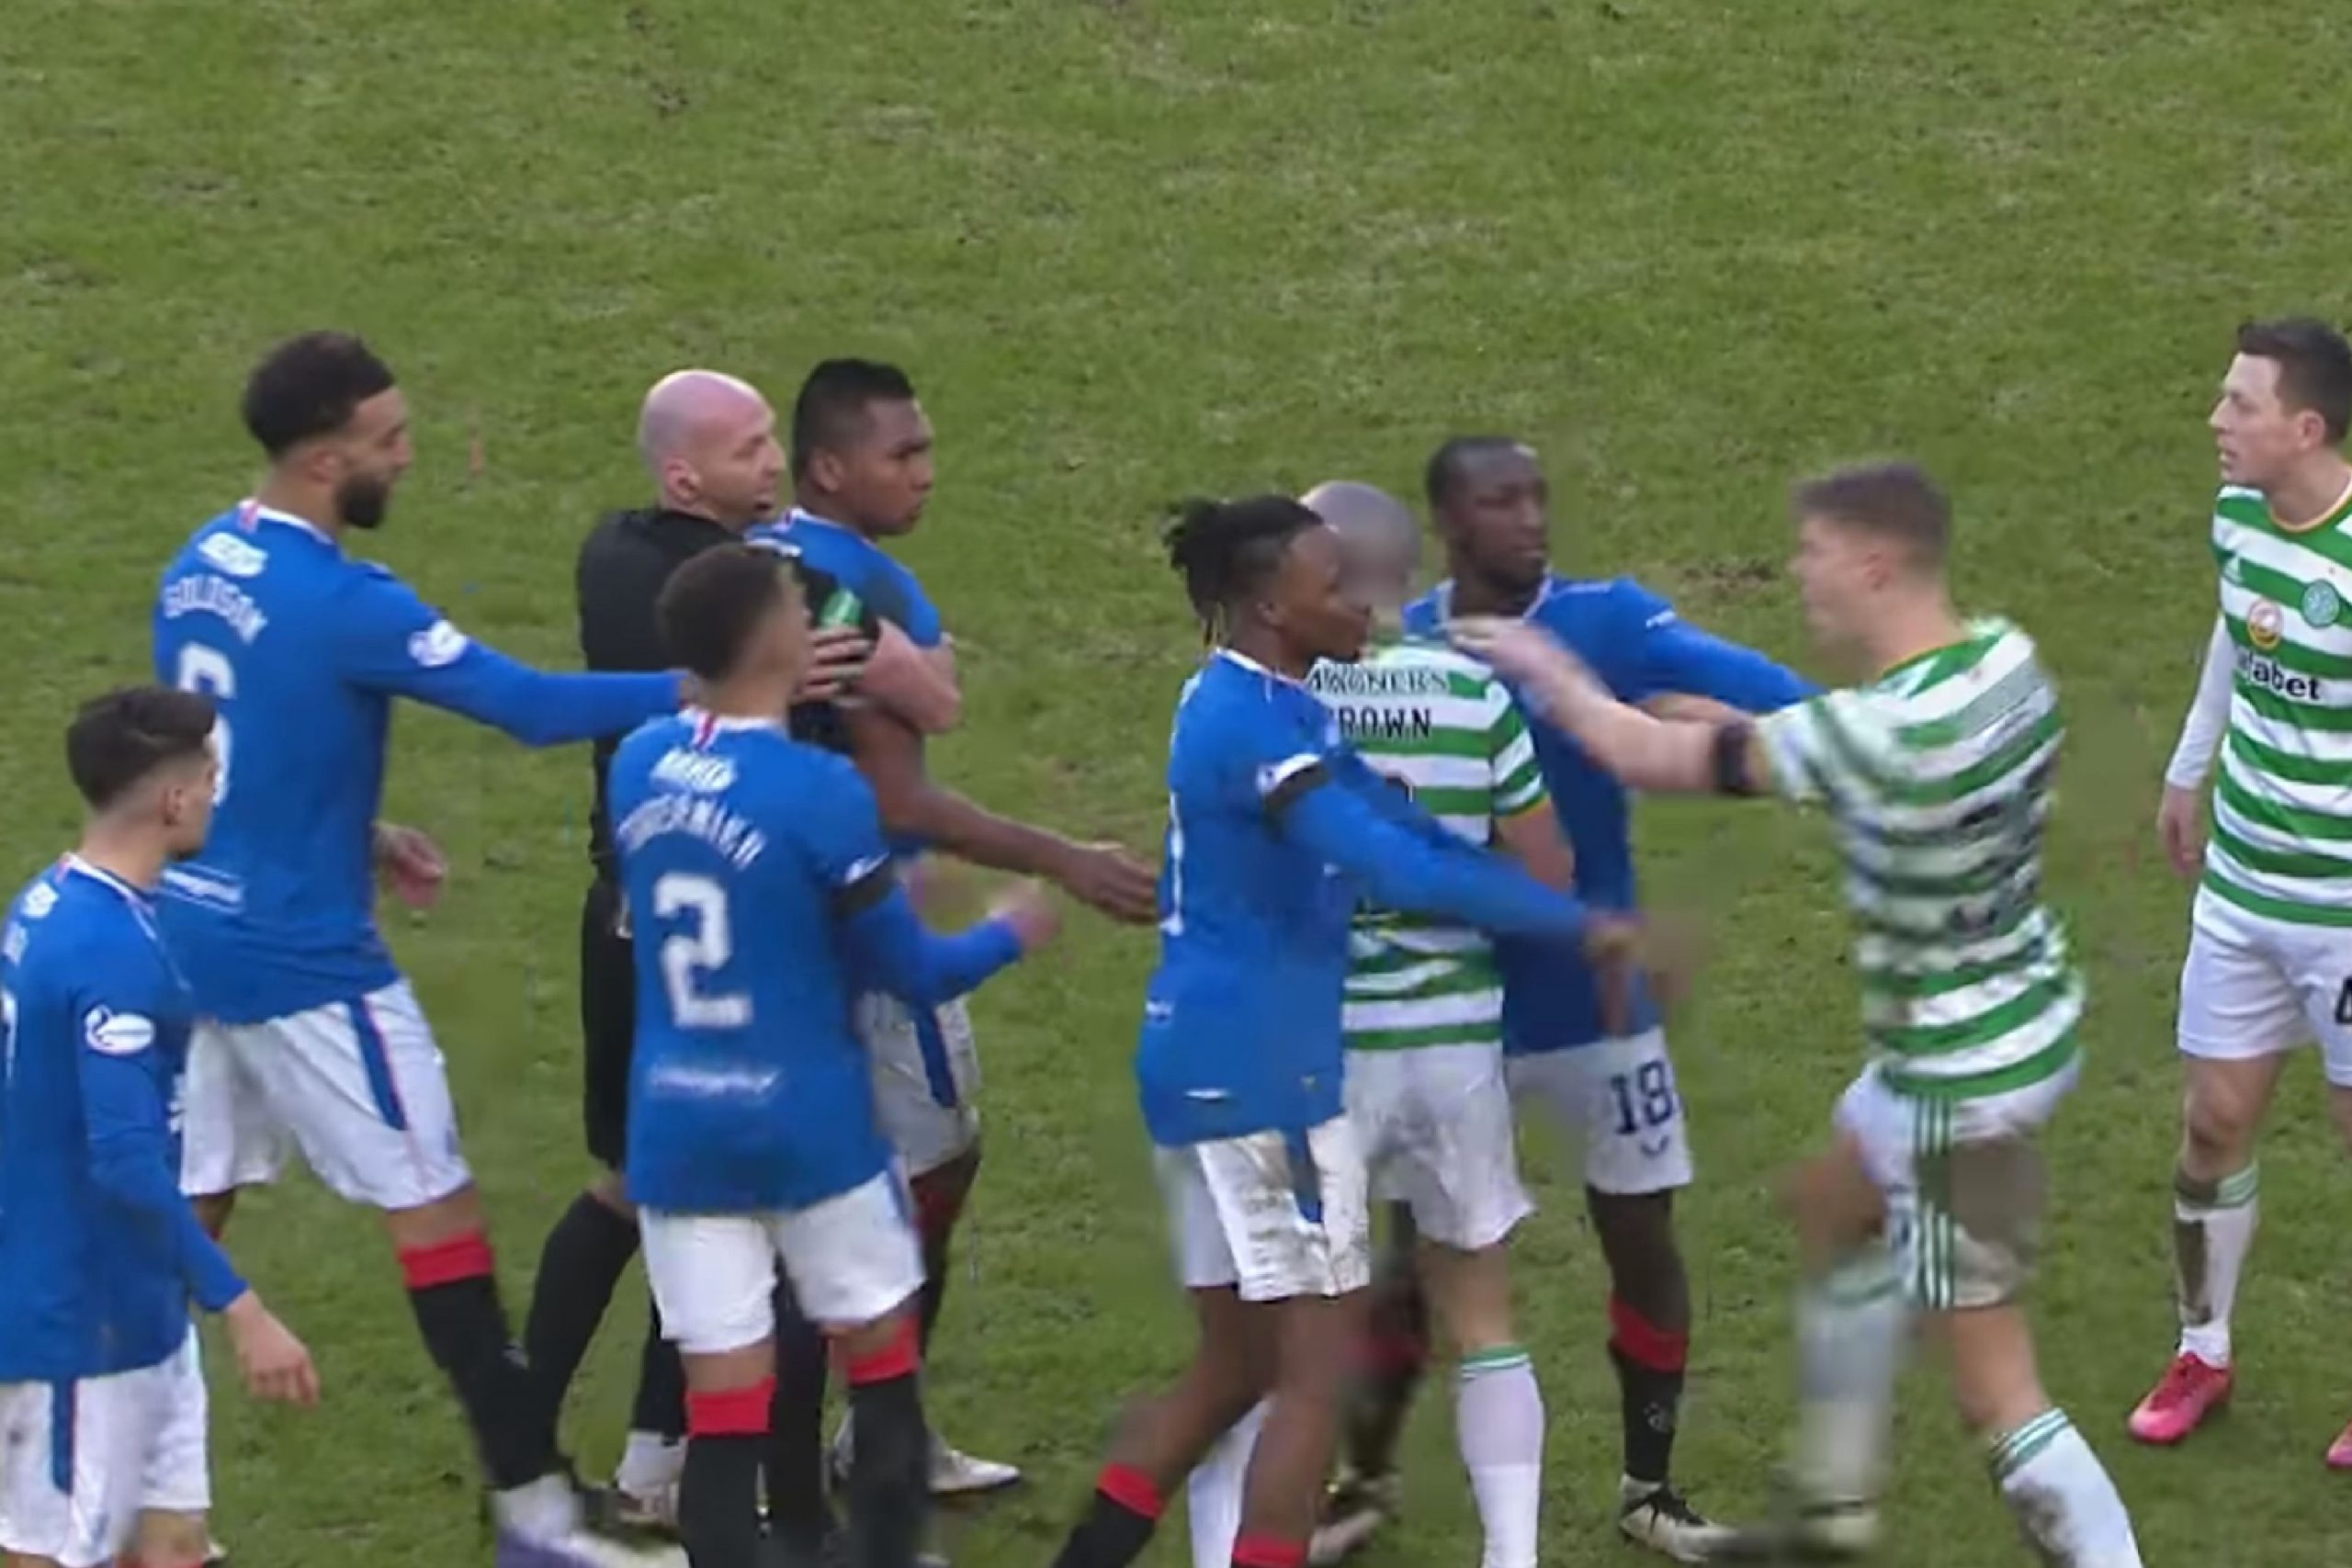 75th minute handbags between Celtic and Rangers as referee Bobby Madden holds Alfredo Morelos back